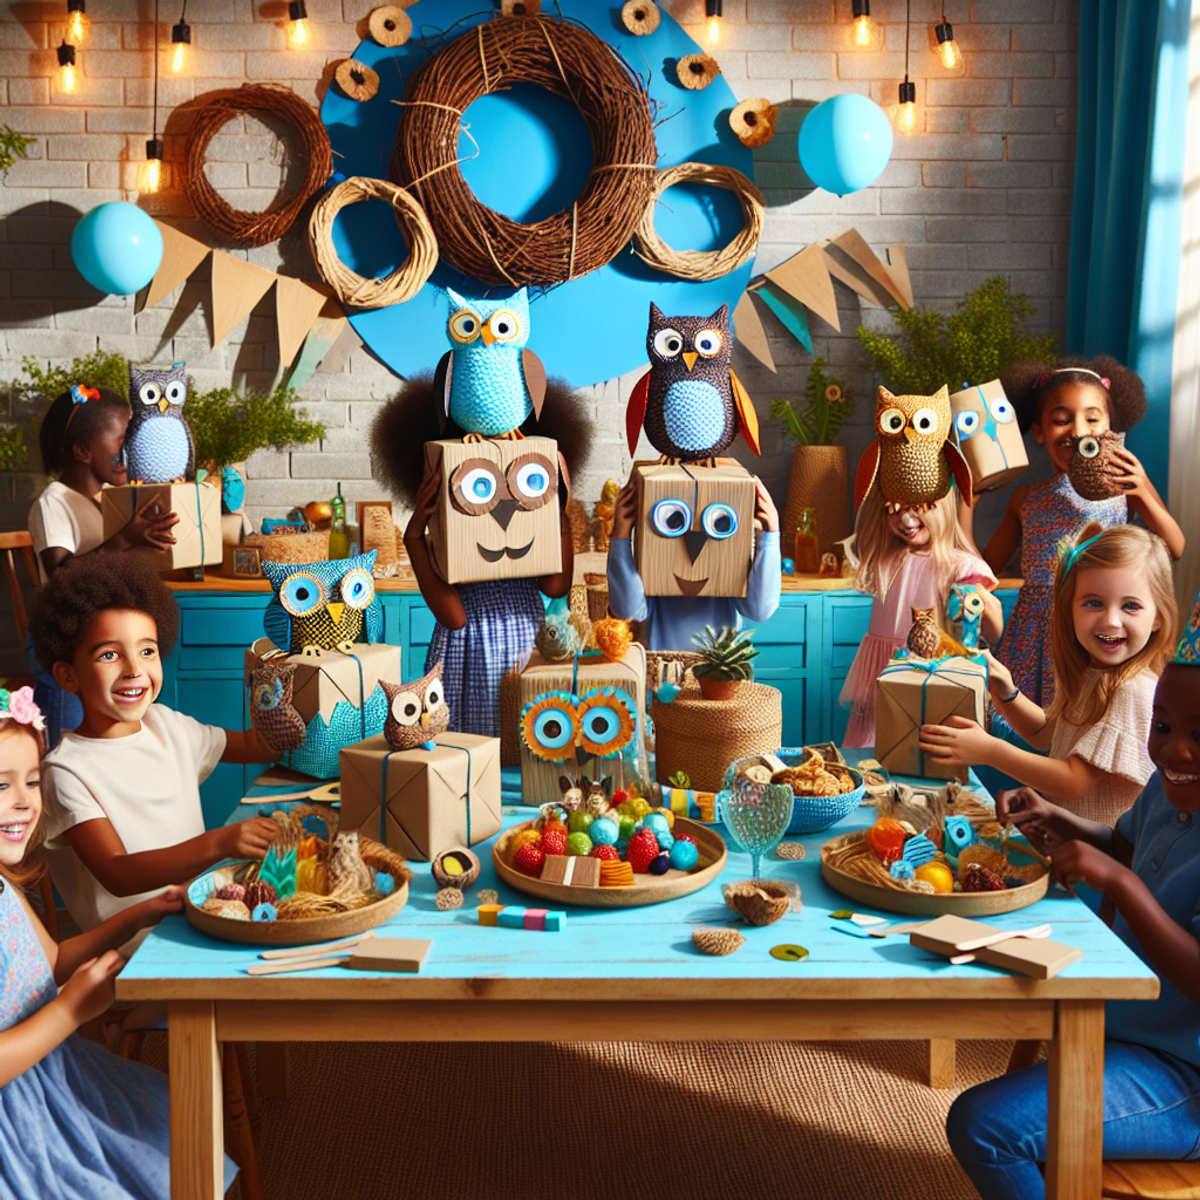 A vibrant and colorful owl-themed birthday party with children of diverse backgrounds playing games and enjoying owl-shaped snacks, surrounded by handcrafted decorations and natural wood elements.